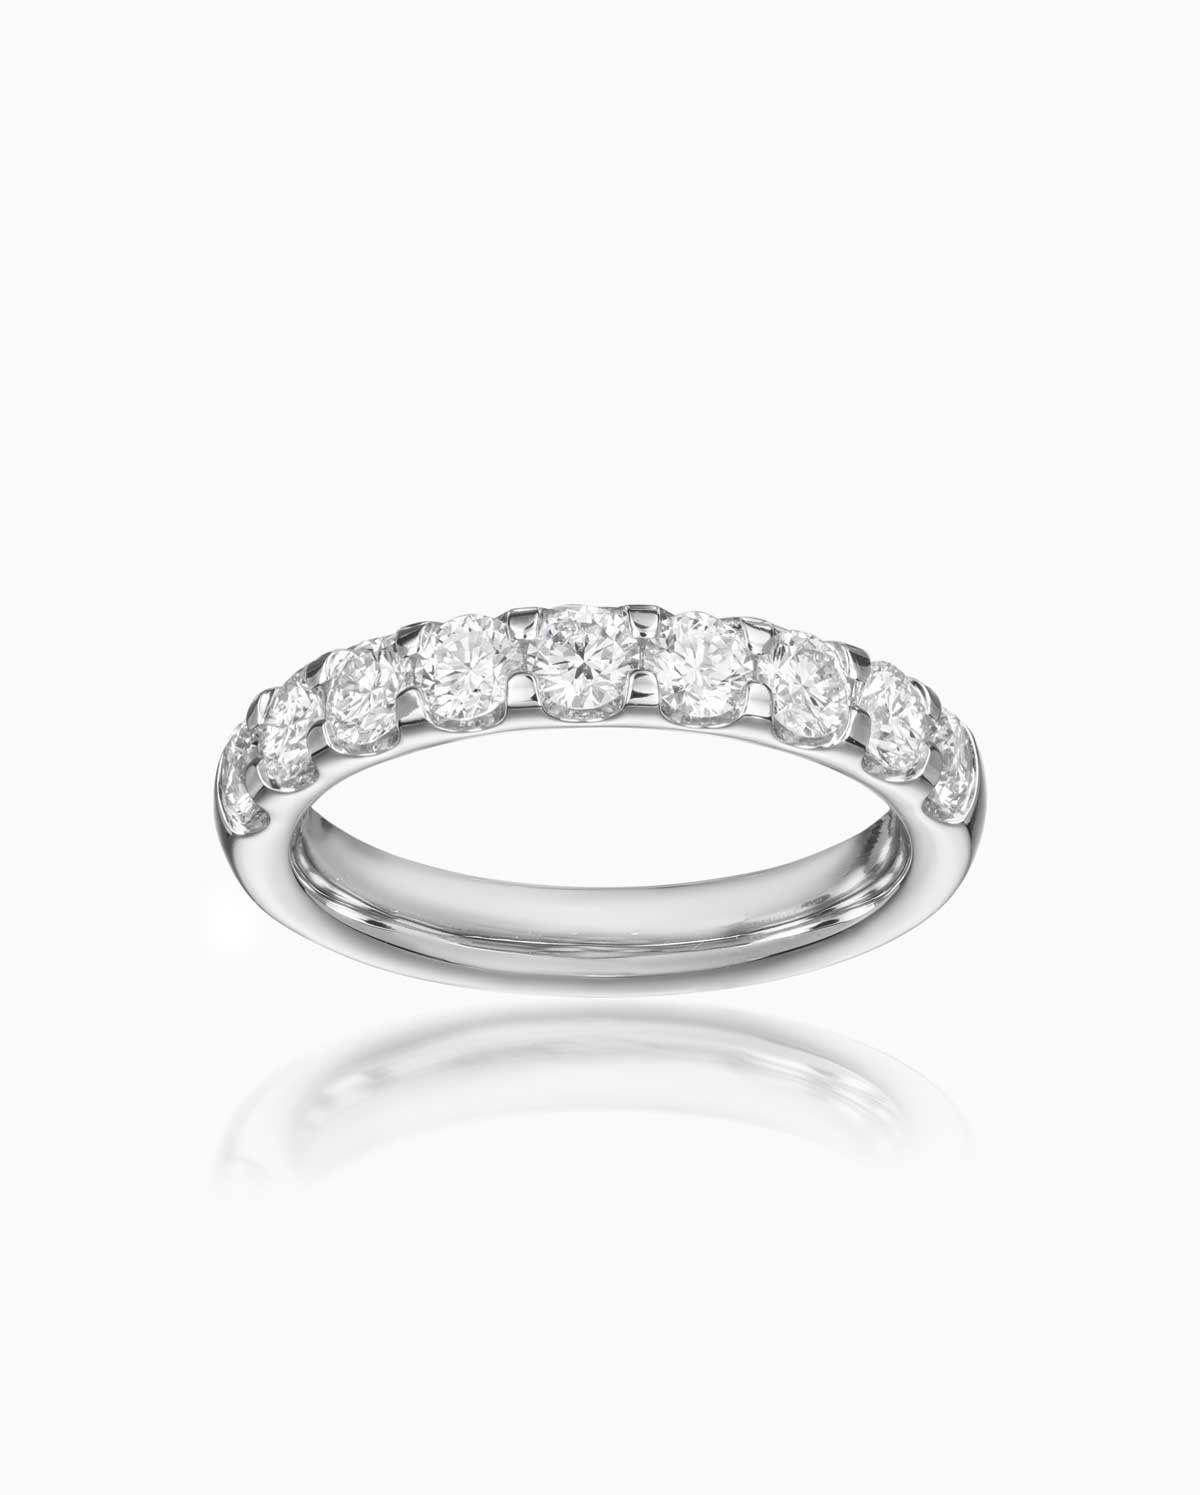 Quintessential 9 stone diamond band featuring platinum alloy by claude and me jewellery.